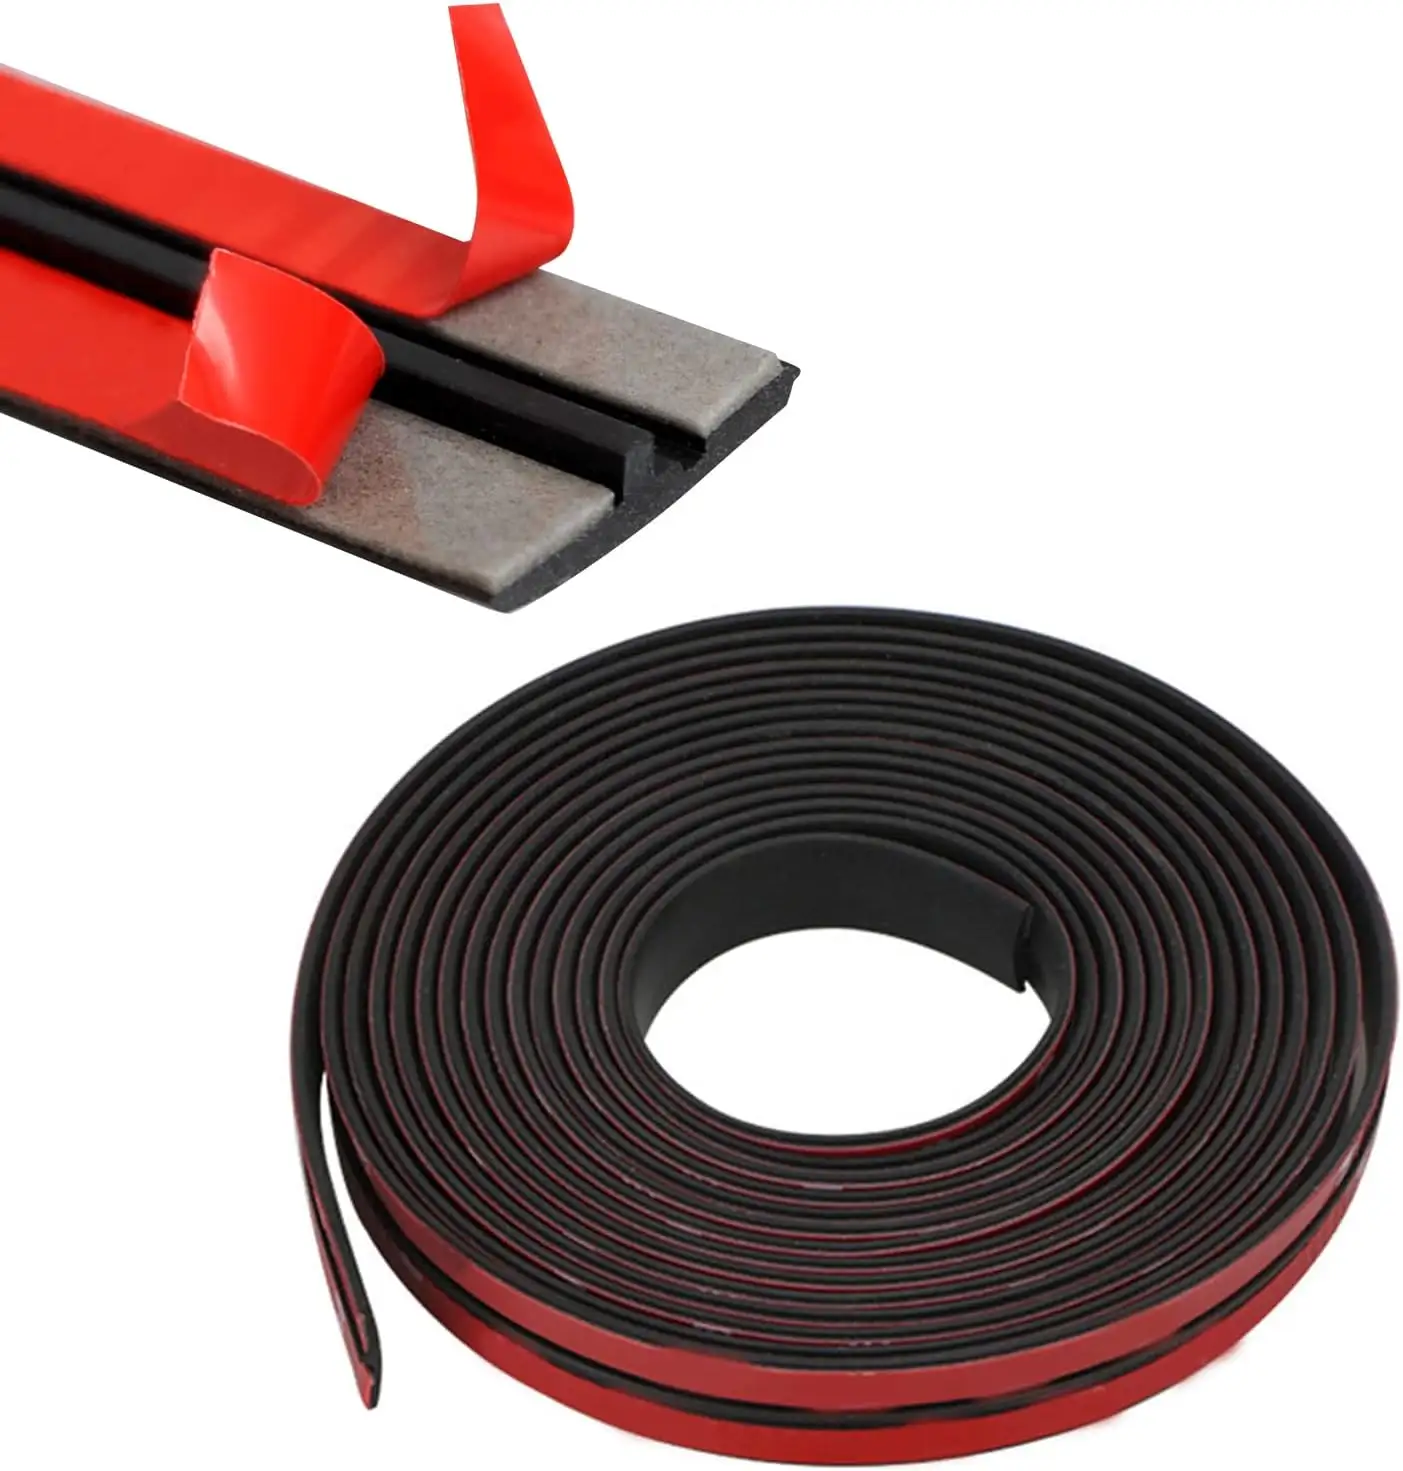 Car door seal adhesive Windshield Rubber Seal Weather Seal, Adhesive T-Shaped Stripping Trim Weatherstrip for Cars